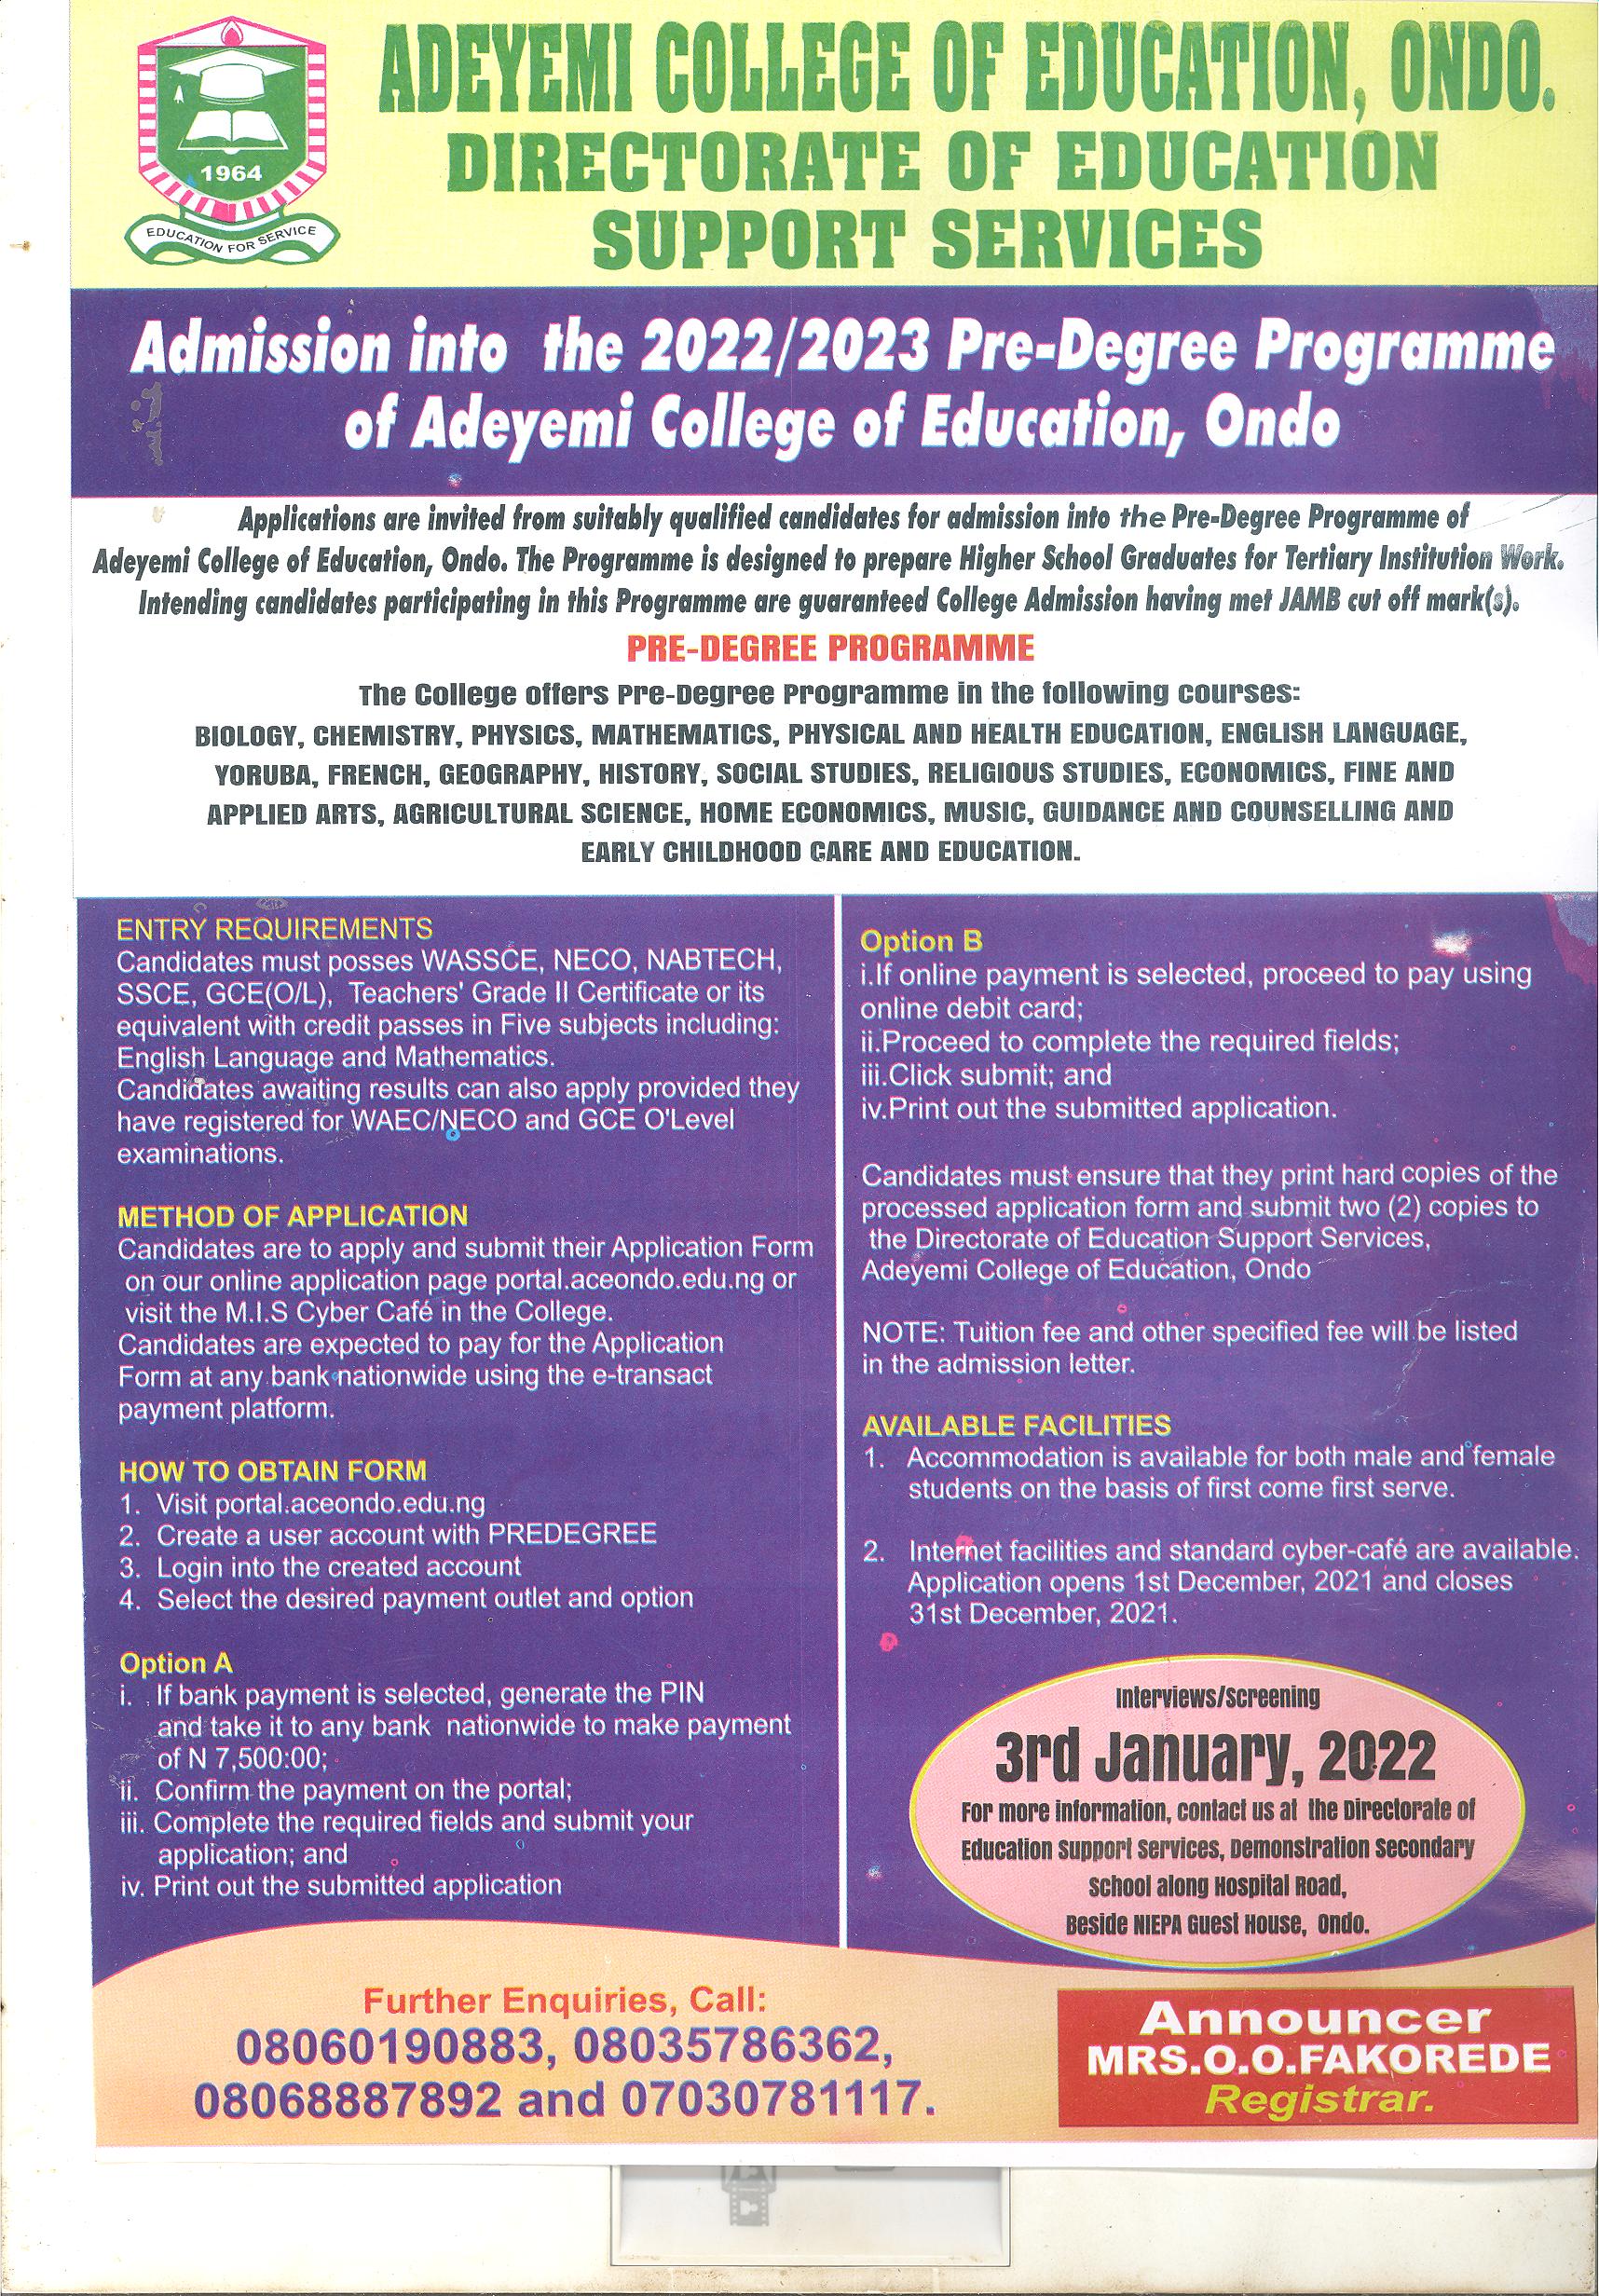 science courses in adeyemi college of education